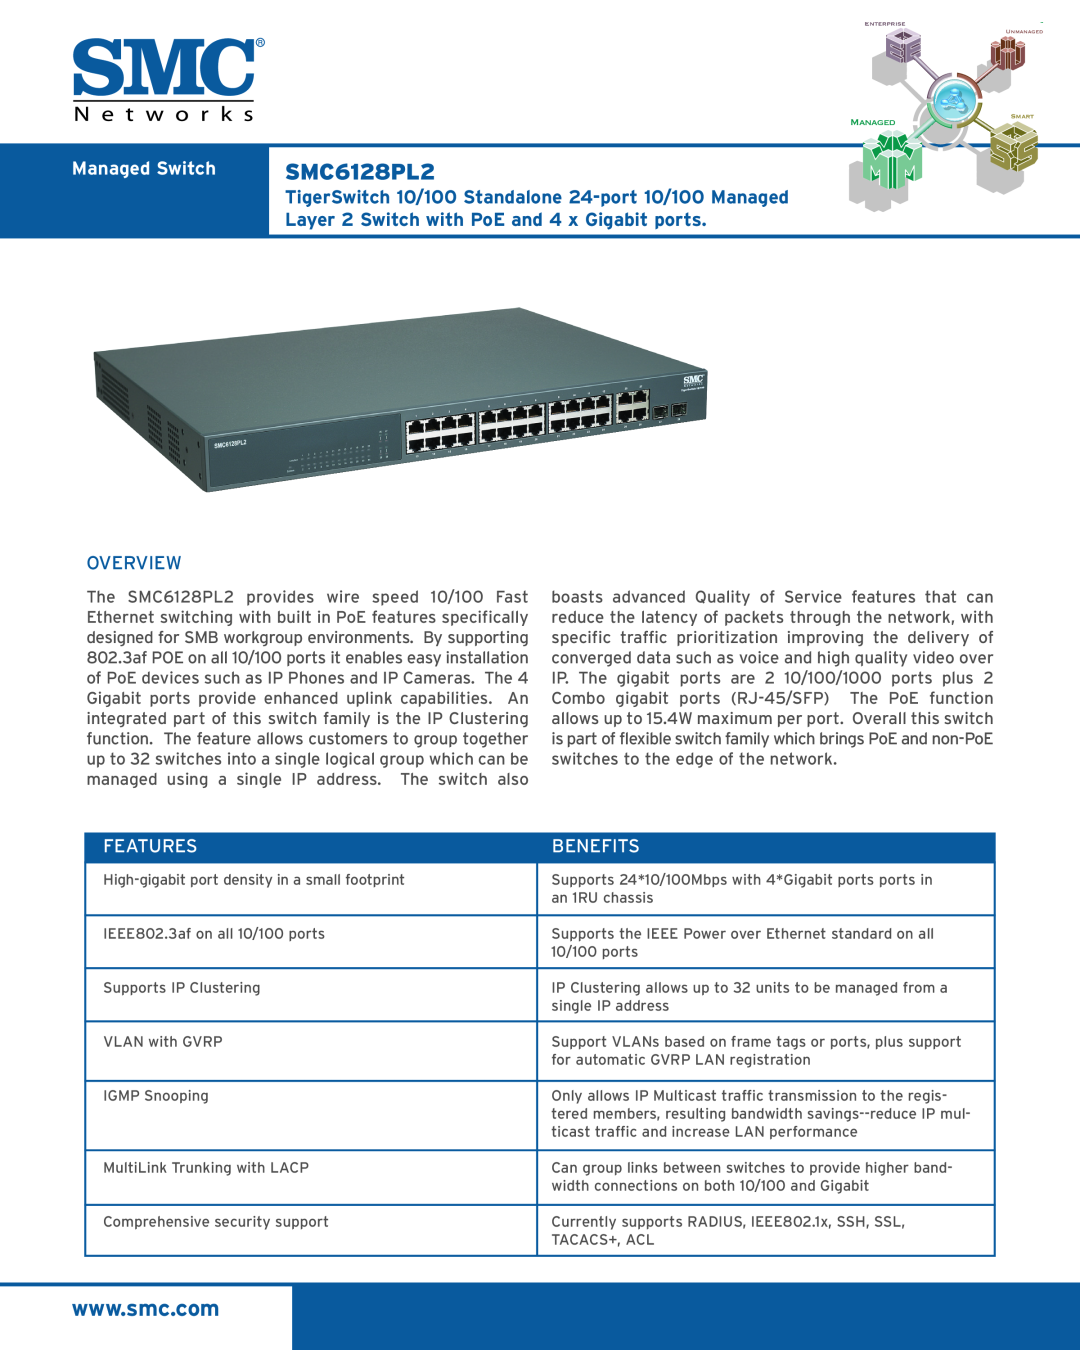 SMC Networks SMC6128PL2 manual Managed Switch, Overview, TigerSwitch 10/100 Standalone 24-port 10/100 Managed, Features 